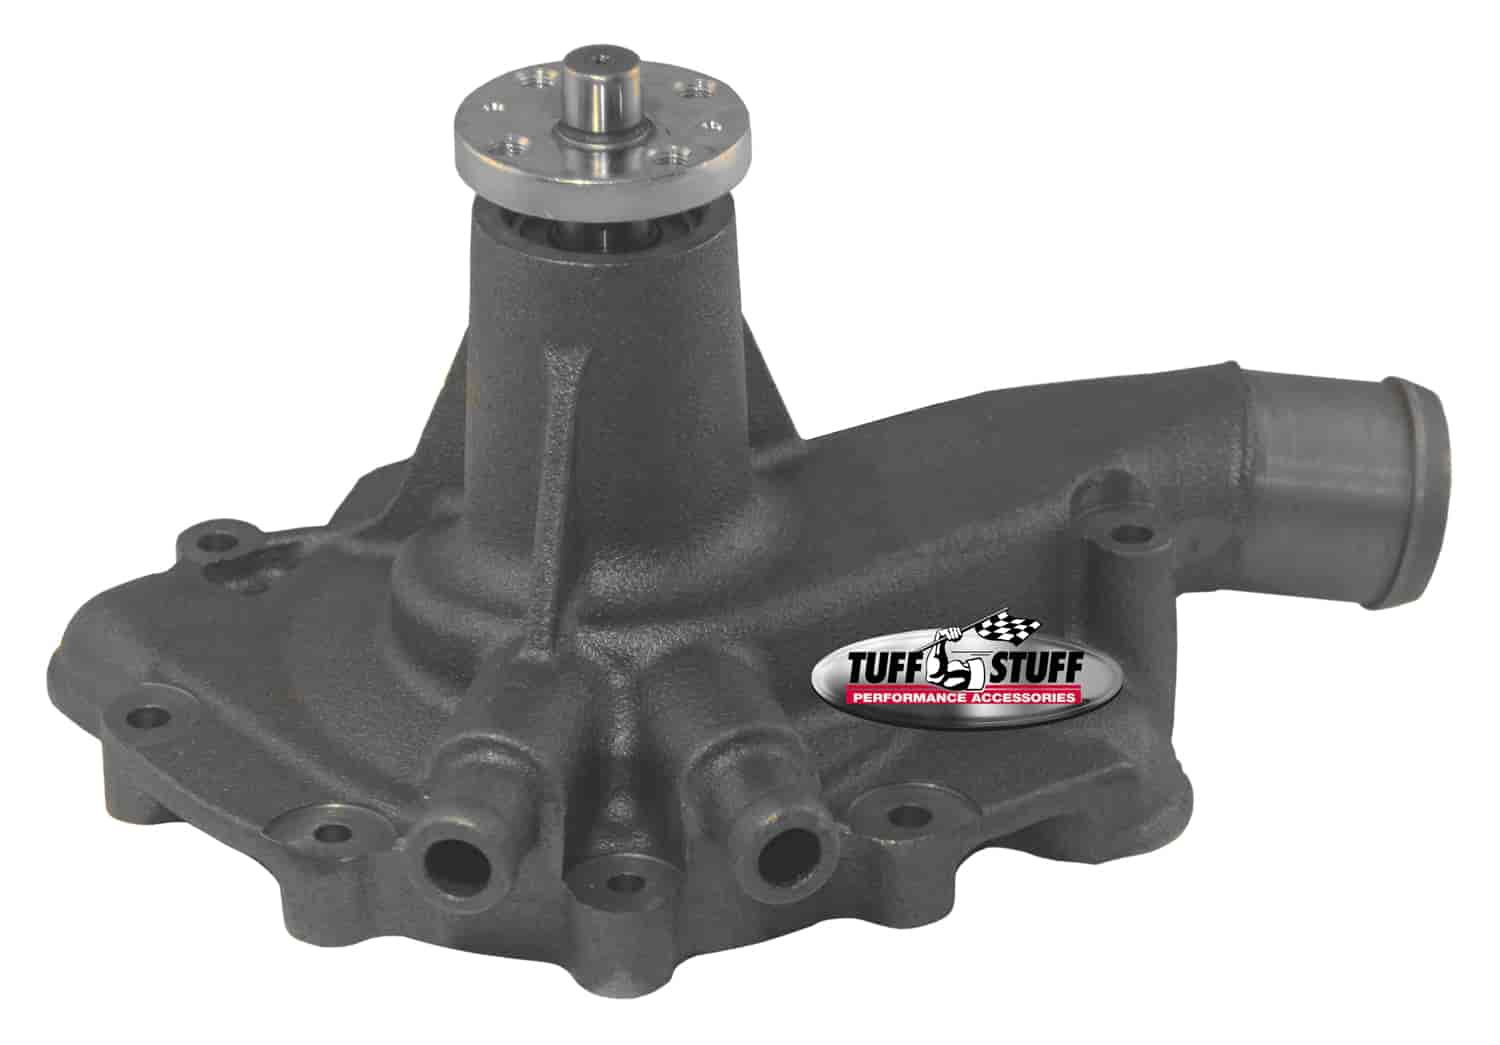 Standard Water Pump As Cast 1968-85 Oldsmobile/Buick Small Block